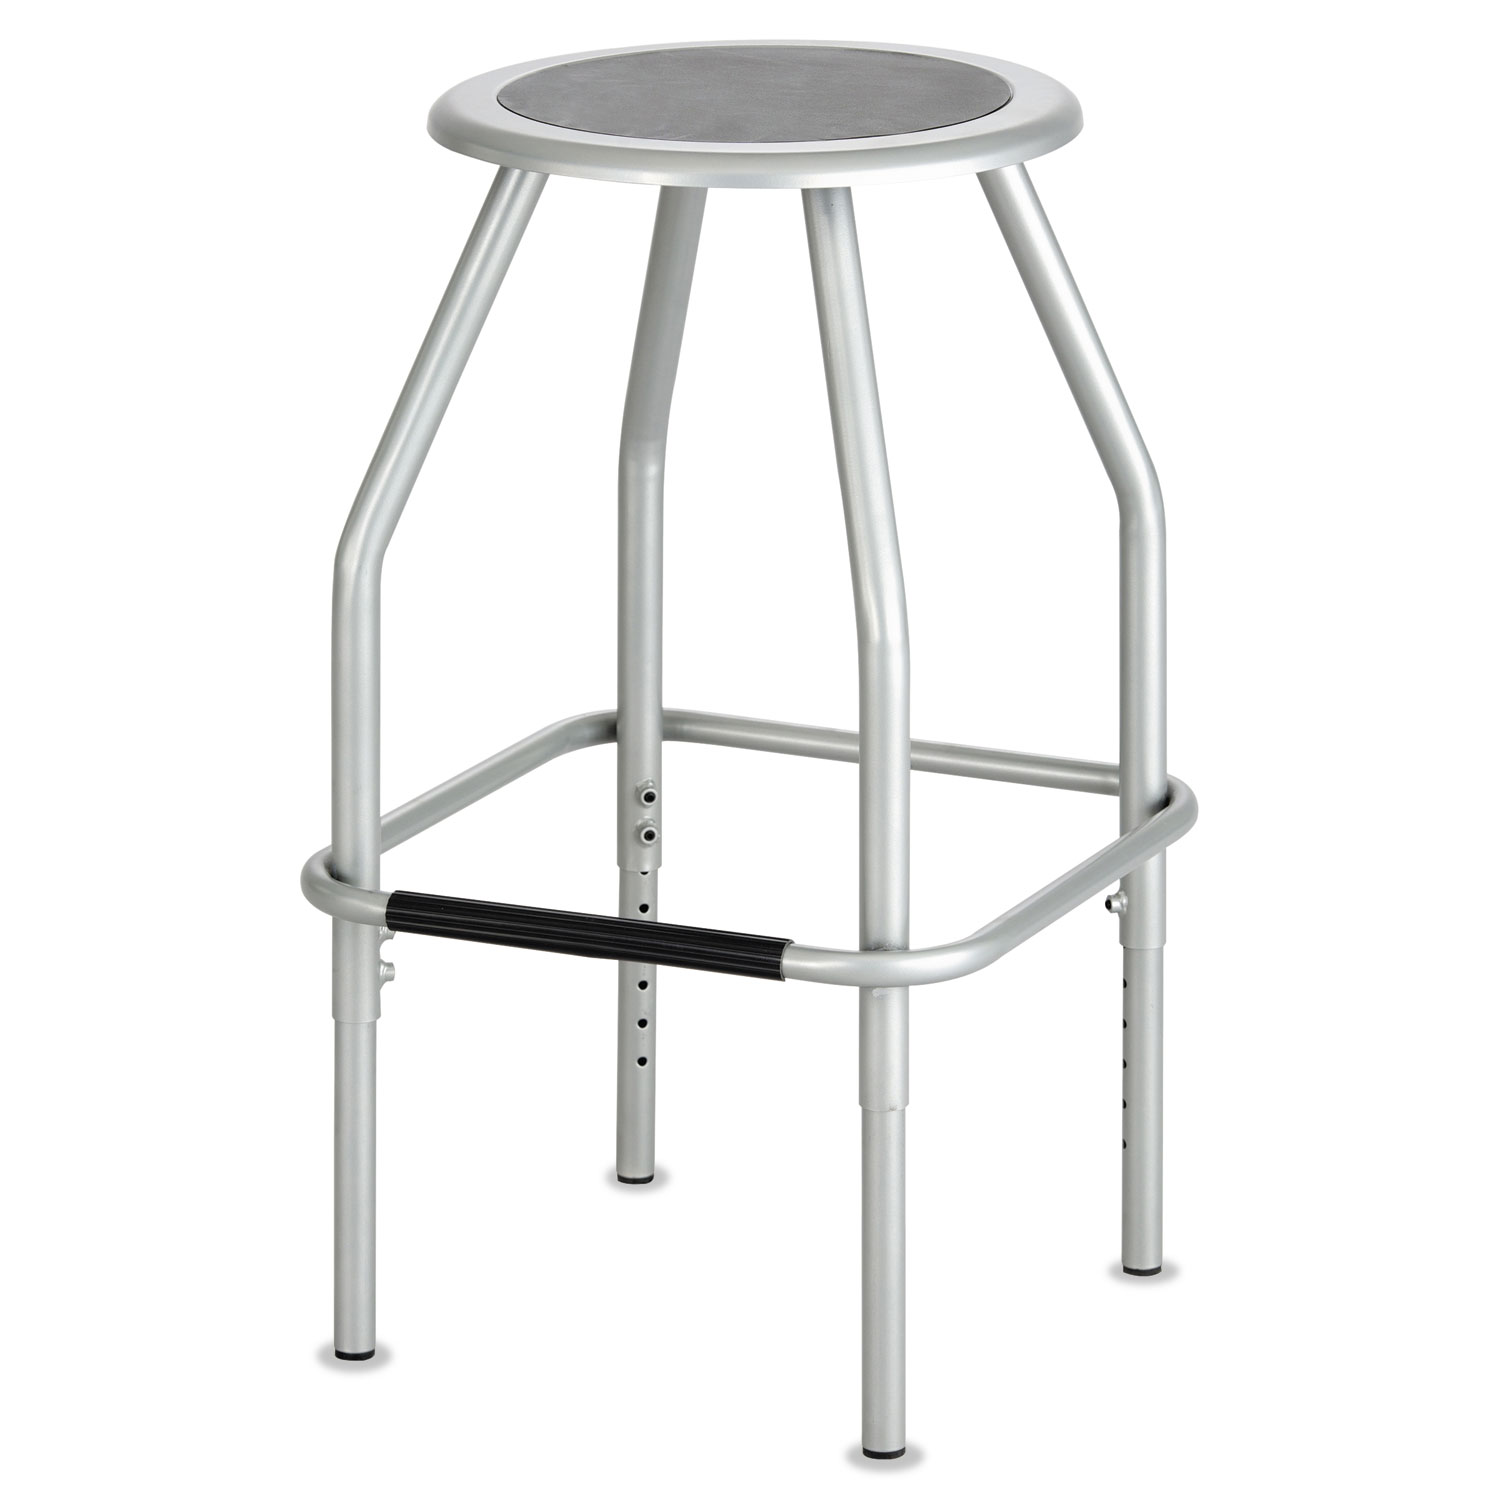  Safco 6666SL Diesel Industrial Stool with Stationary Seat, 30 Seat Height, Supports up to 250 lbs., Silver Seat/Silver Back, Silver Base (SAF6666SL) 